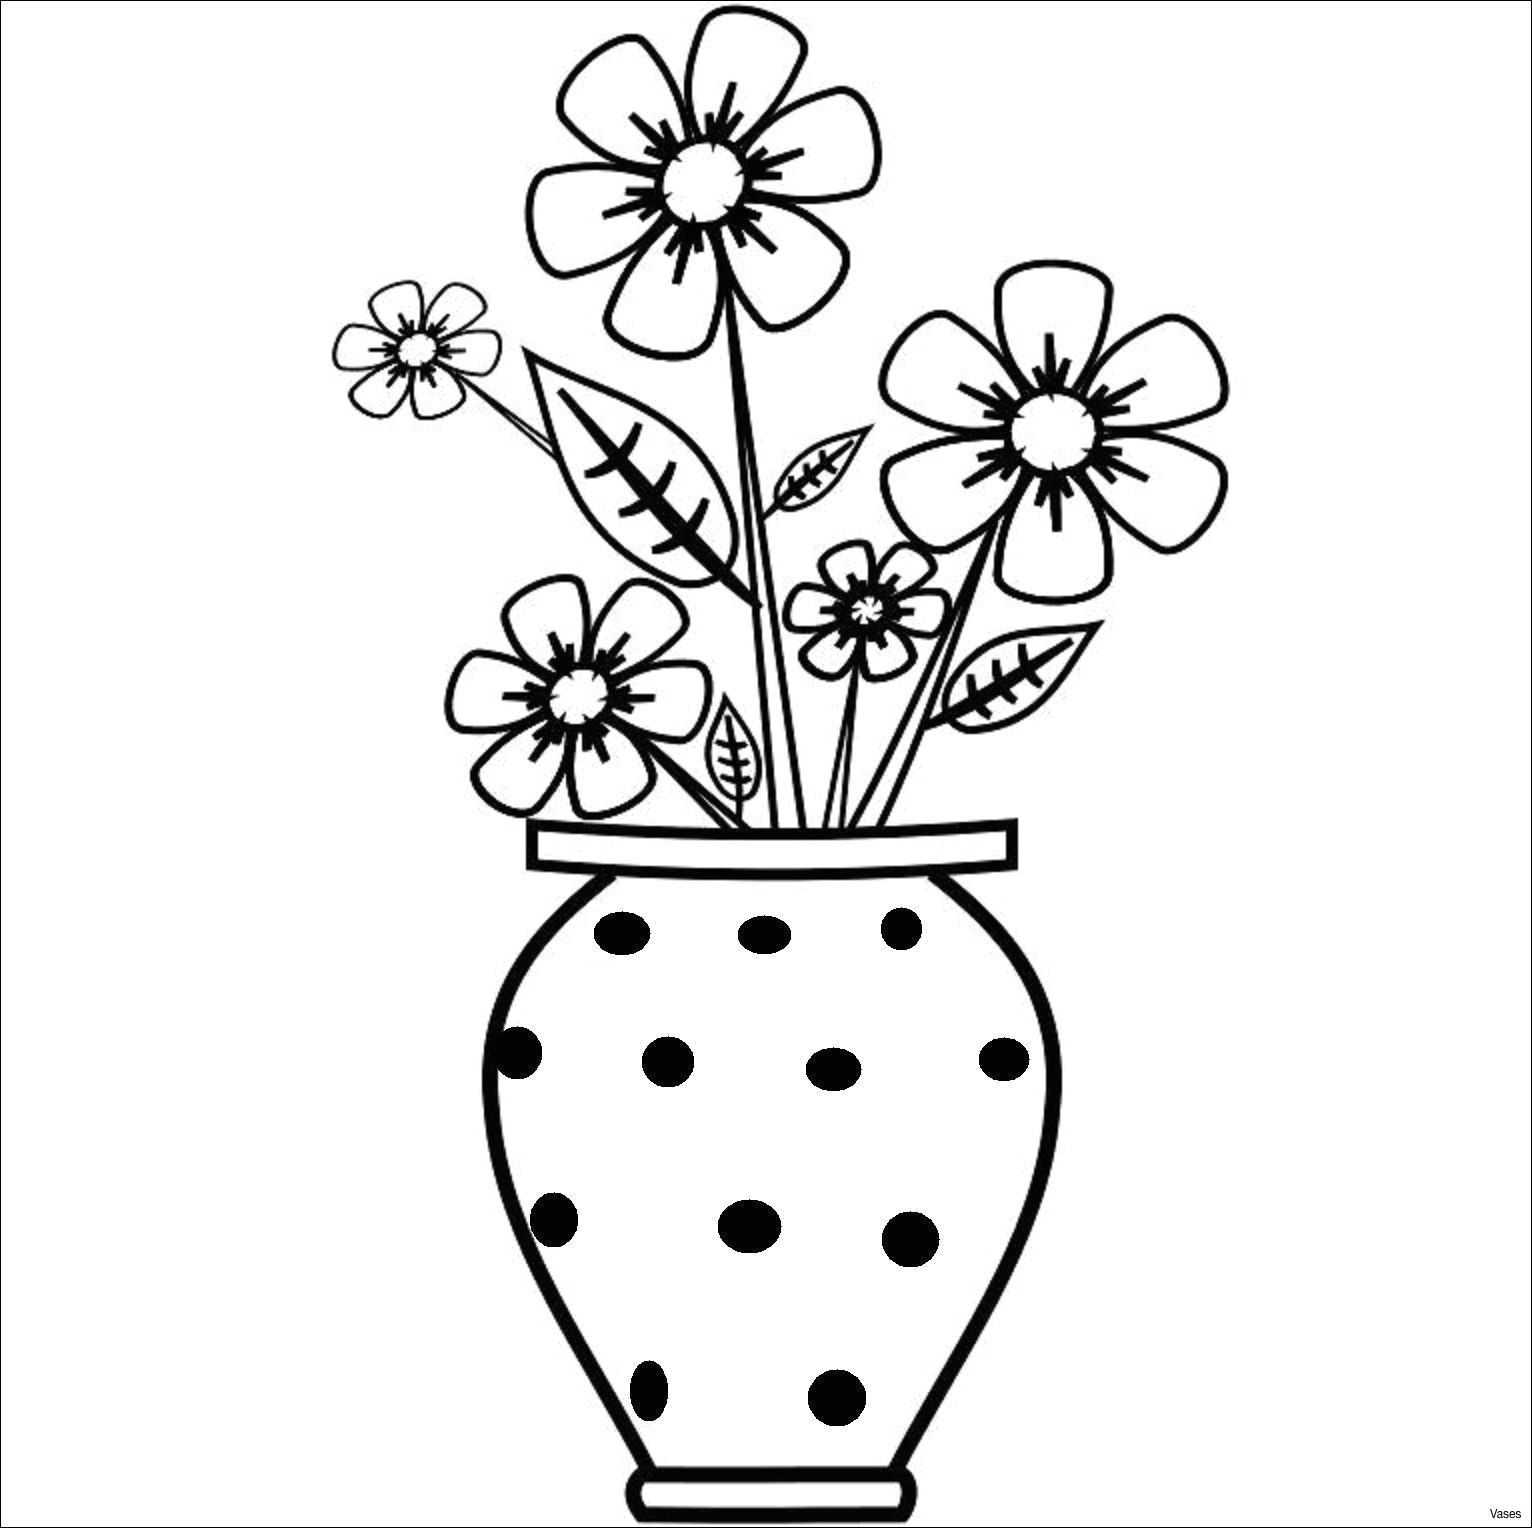 Easy Drawings by Steps Images Of Easy Drawings Vase Art Drawings How to Draw A Vase Step 2h